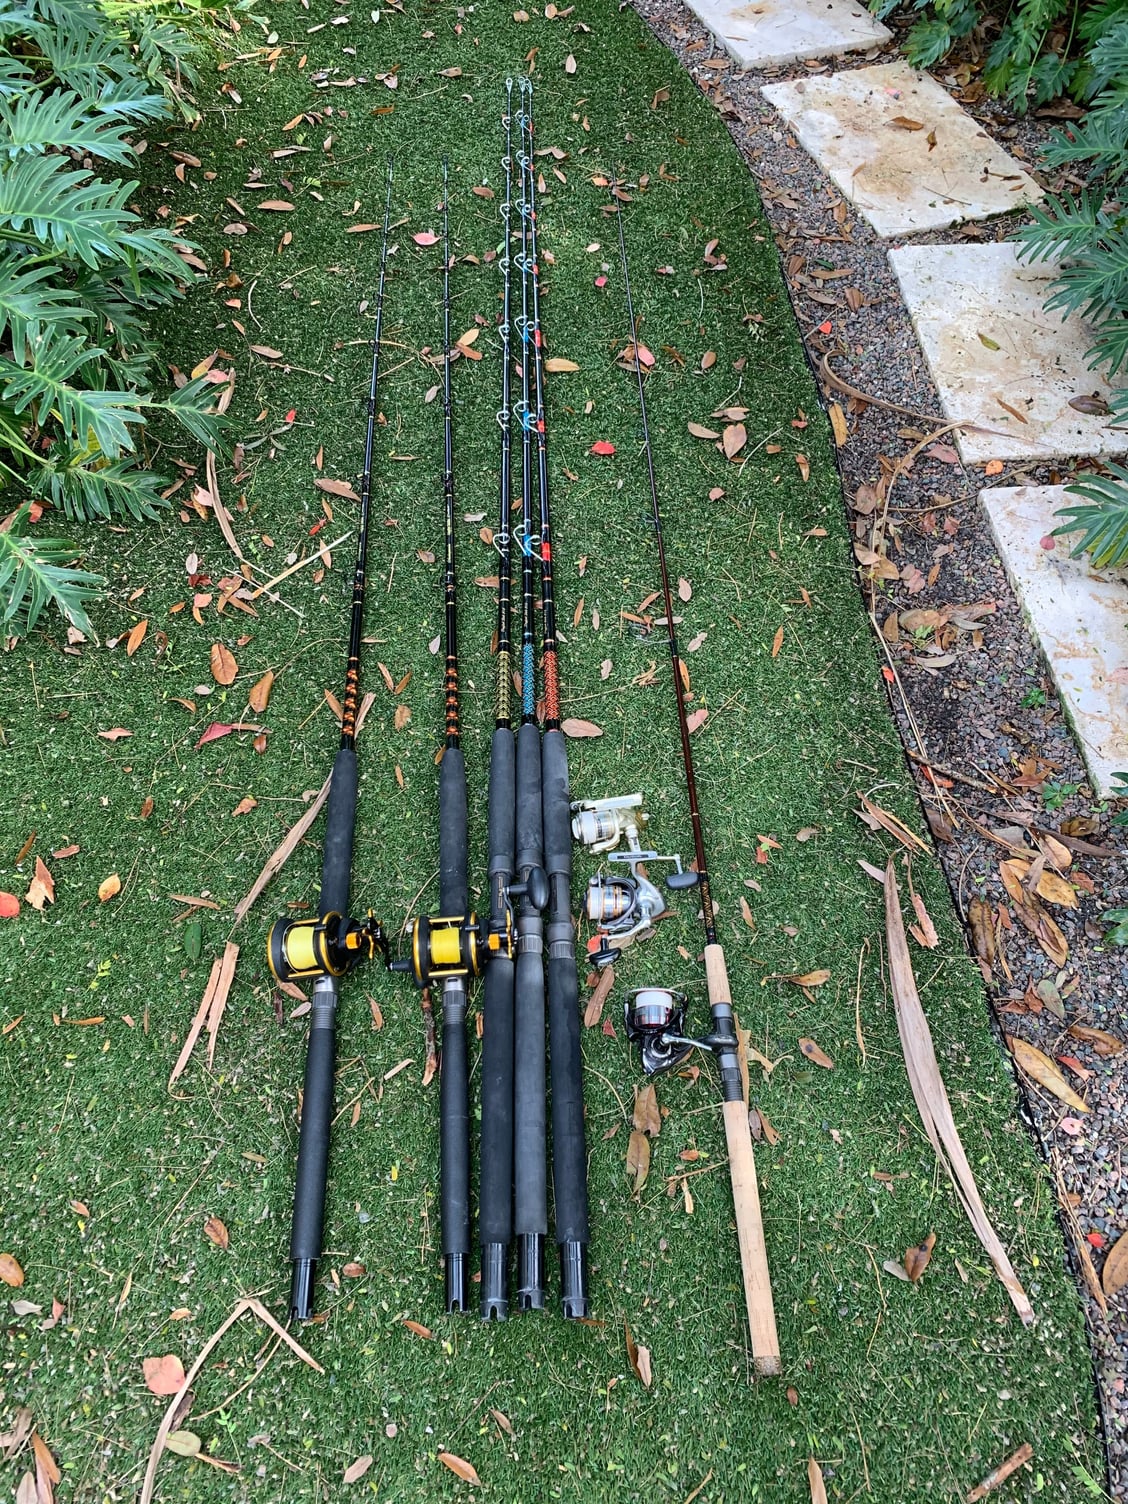 FS - Shimano, Penn, Daiwa inshore and offshore rods/reels - The Hull Truth  - Boating and Fishing Forum